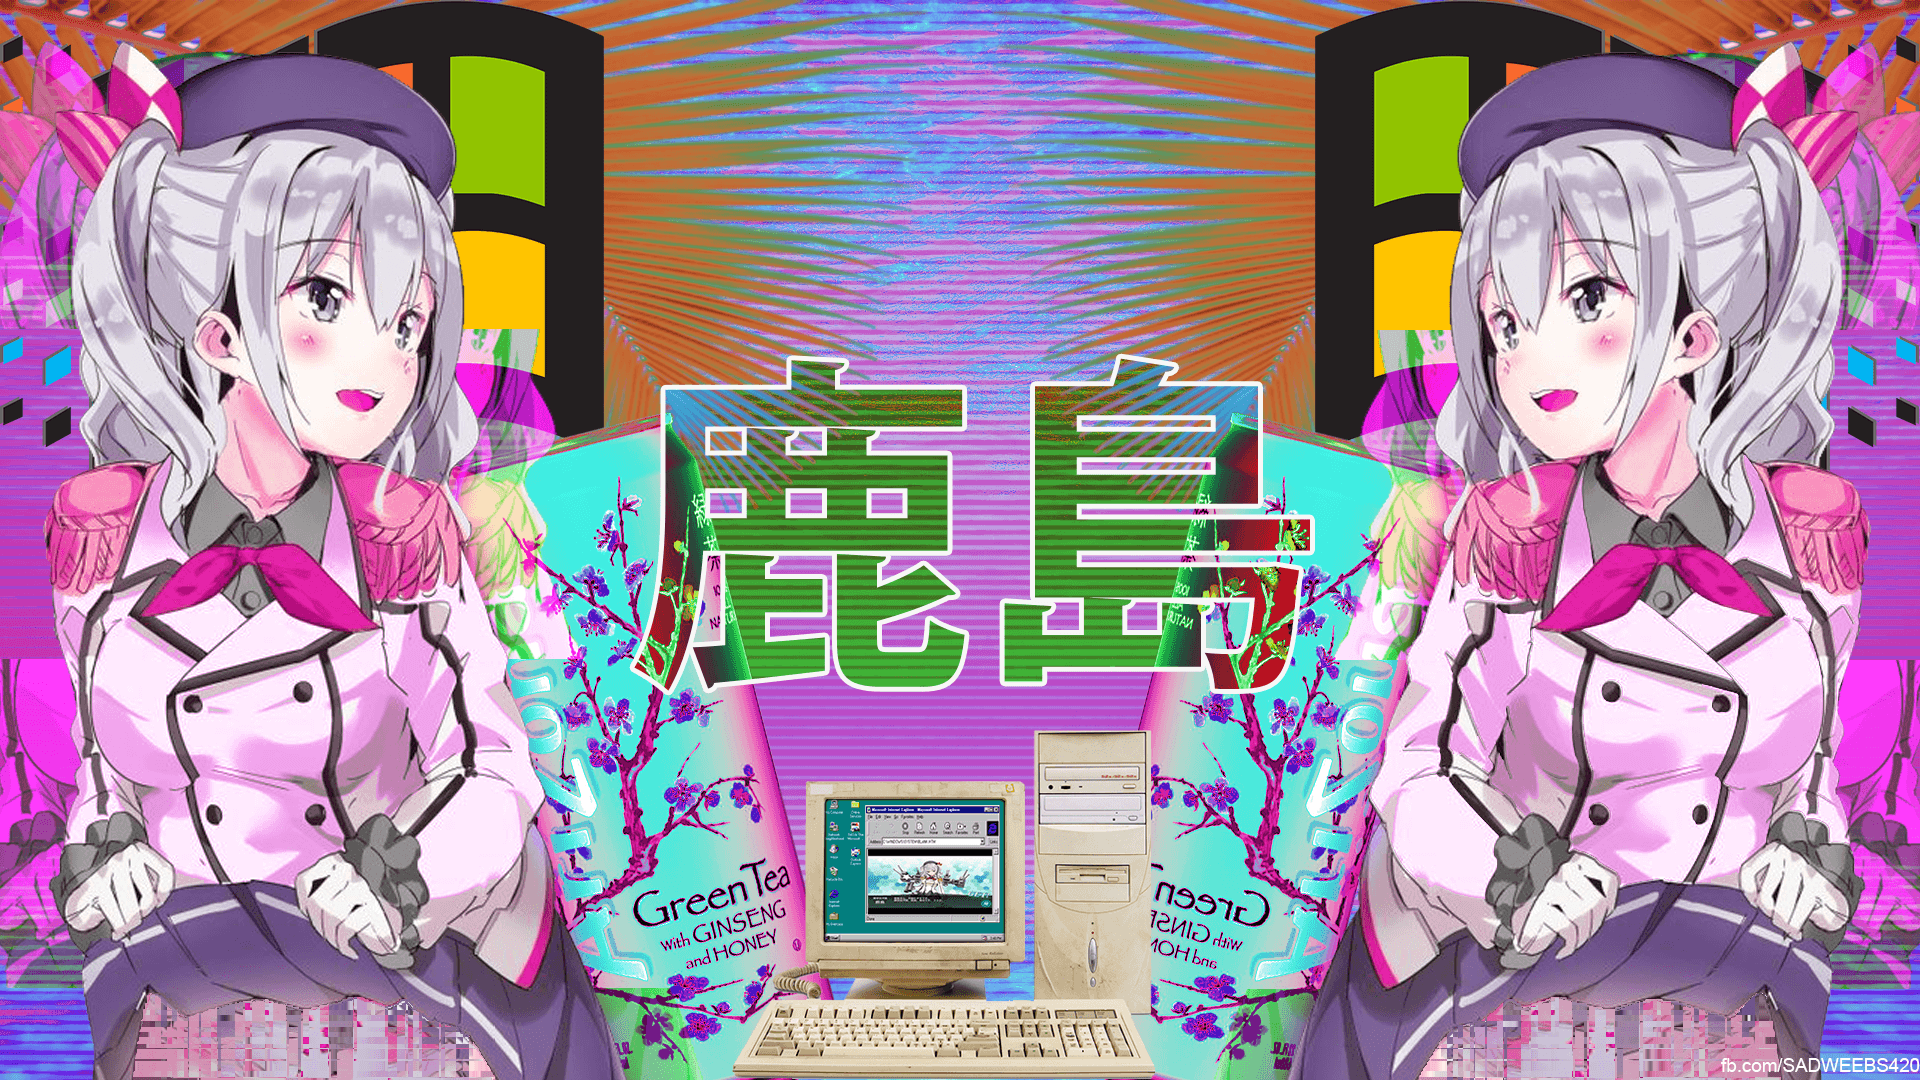 1920x1080 Anime Aesthetic Wallpapers - Wallpaper Cave